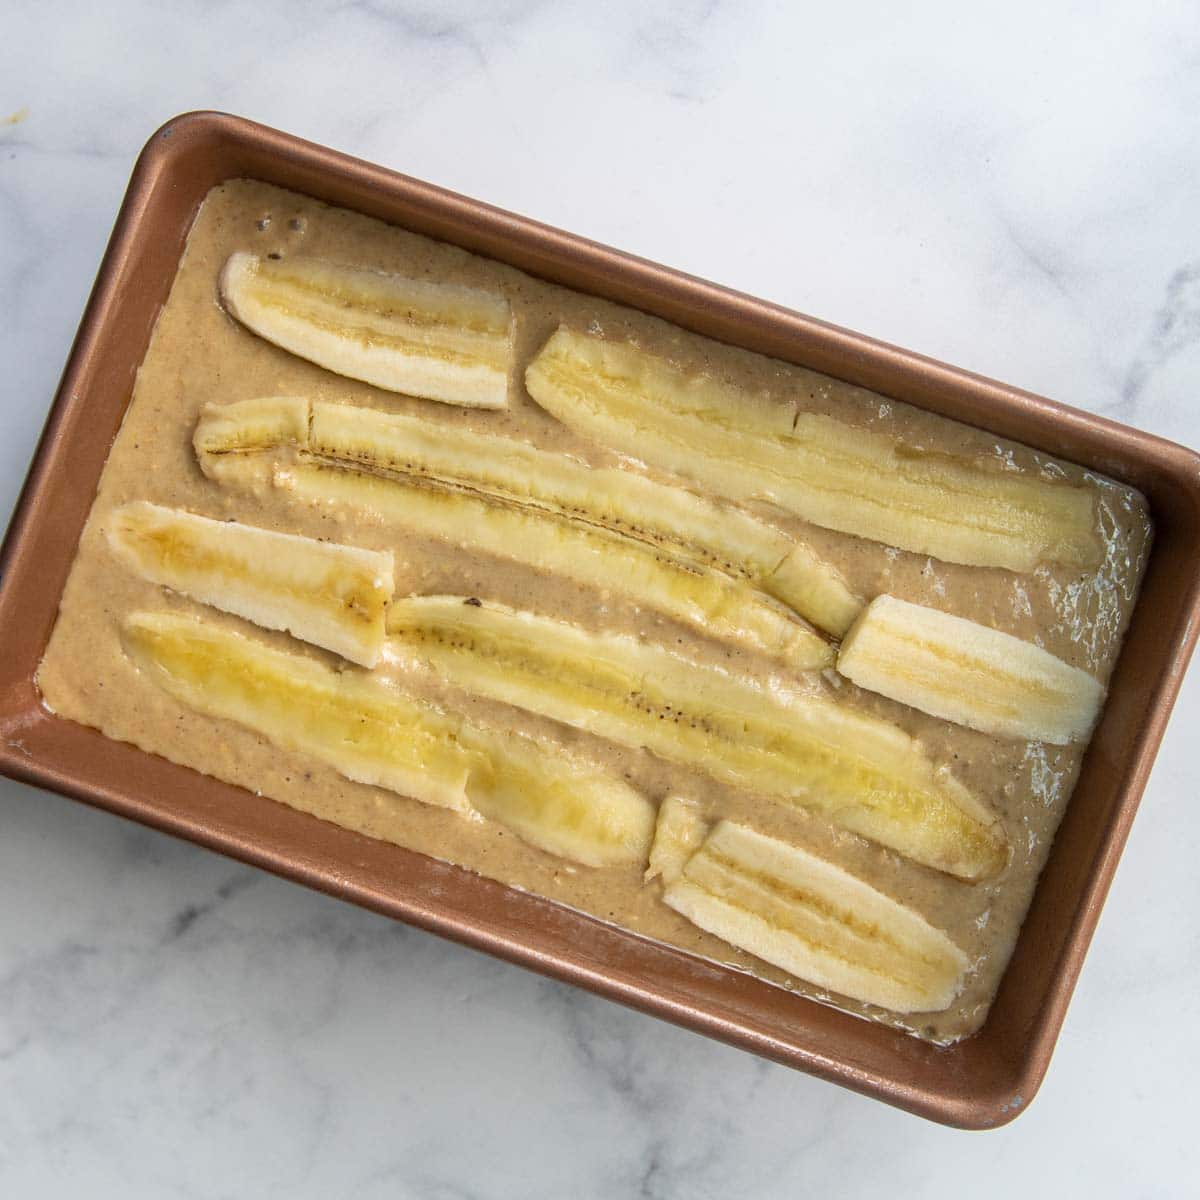 image showing unbaked bread with sliced bananas on top